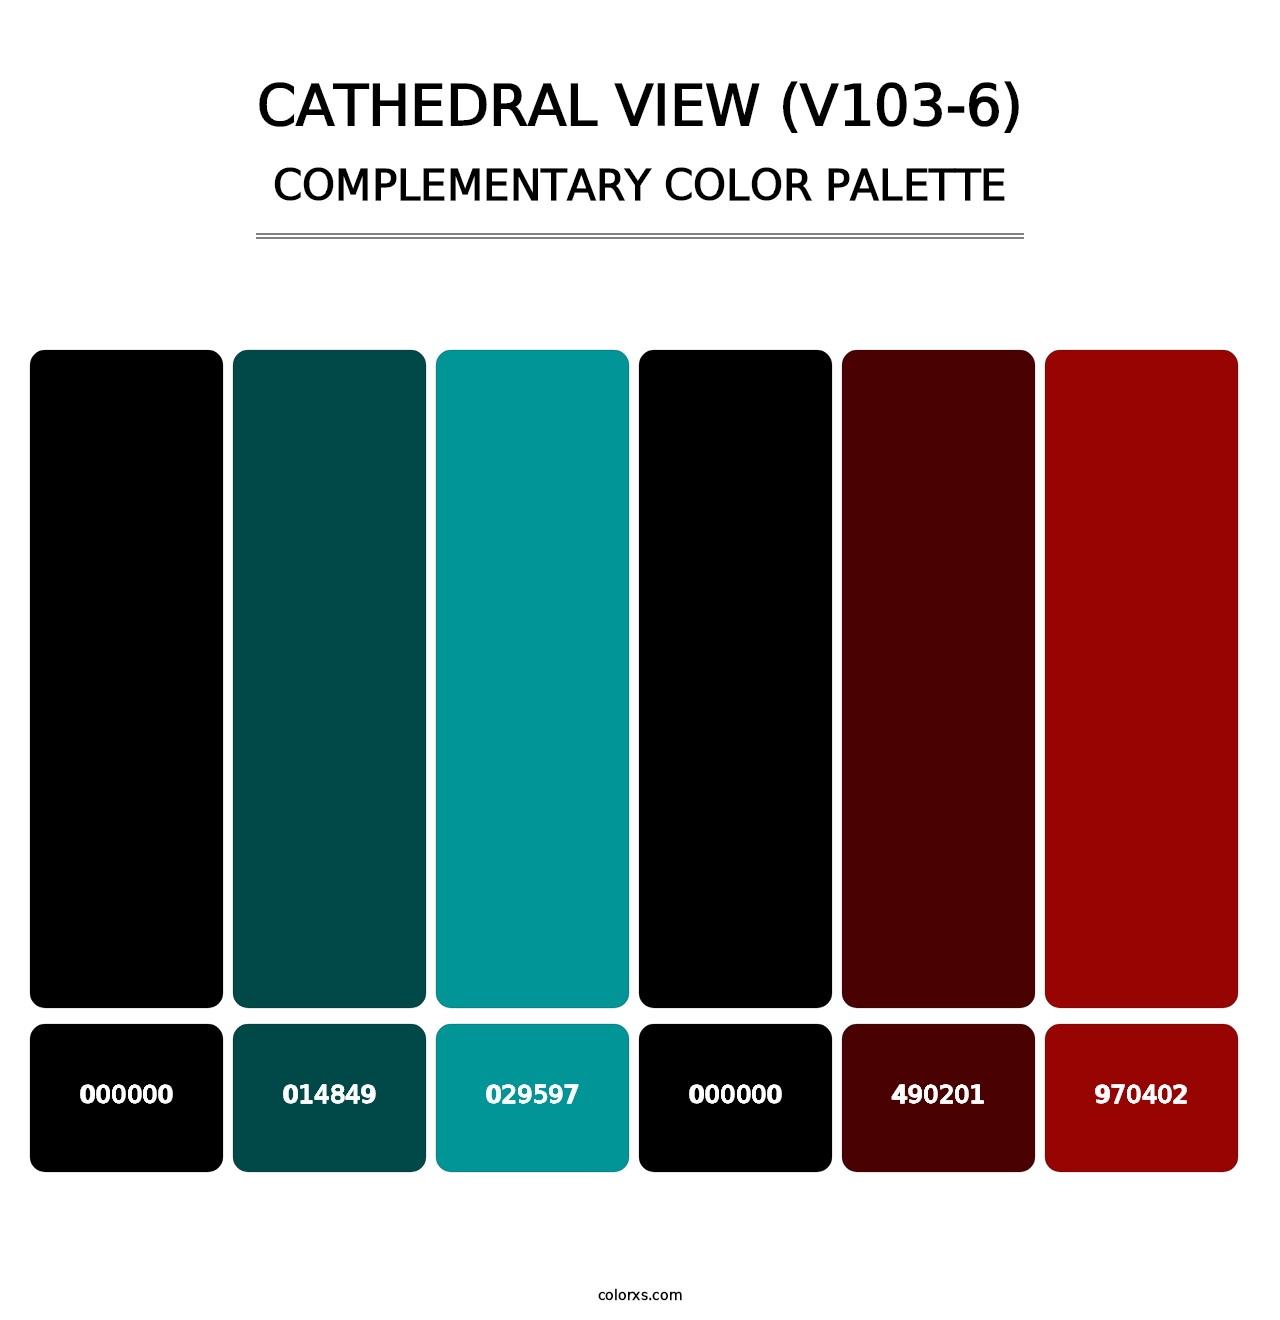 Cathedral View (V103-6) - Complementary Color Palette